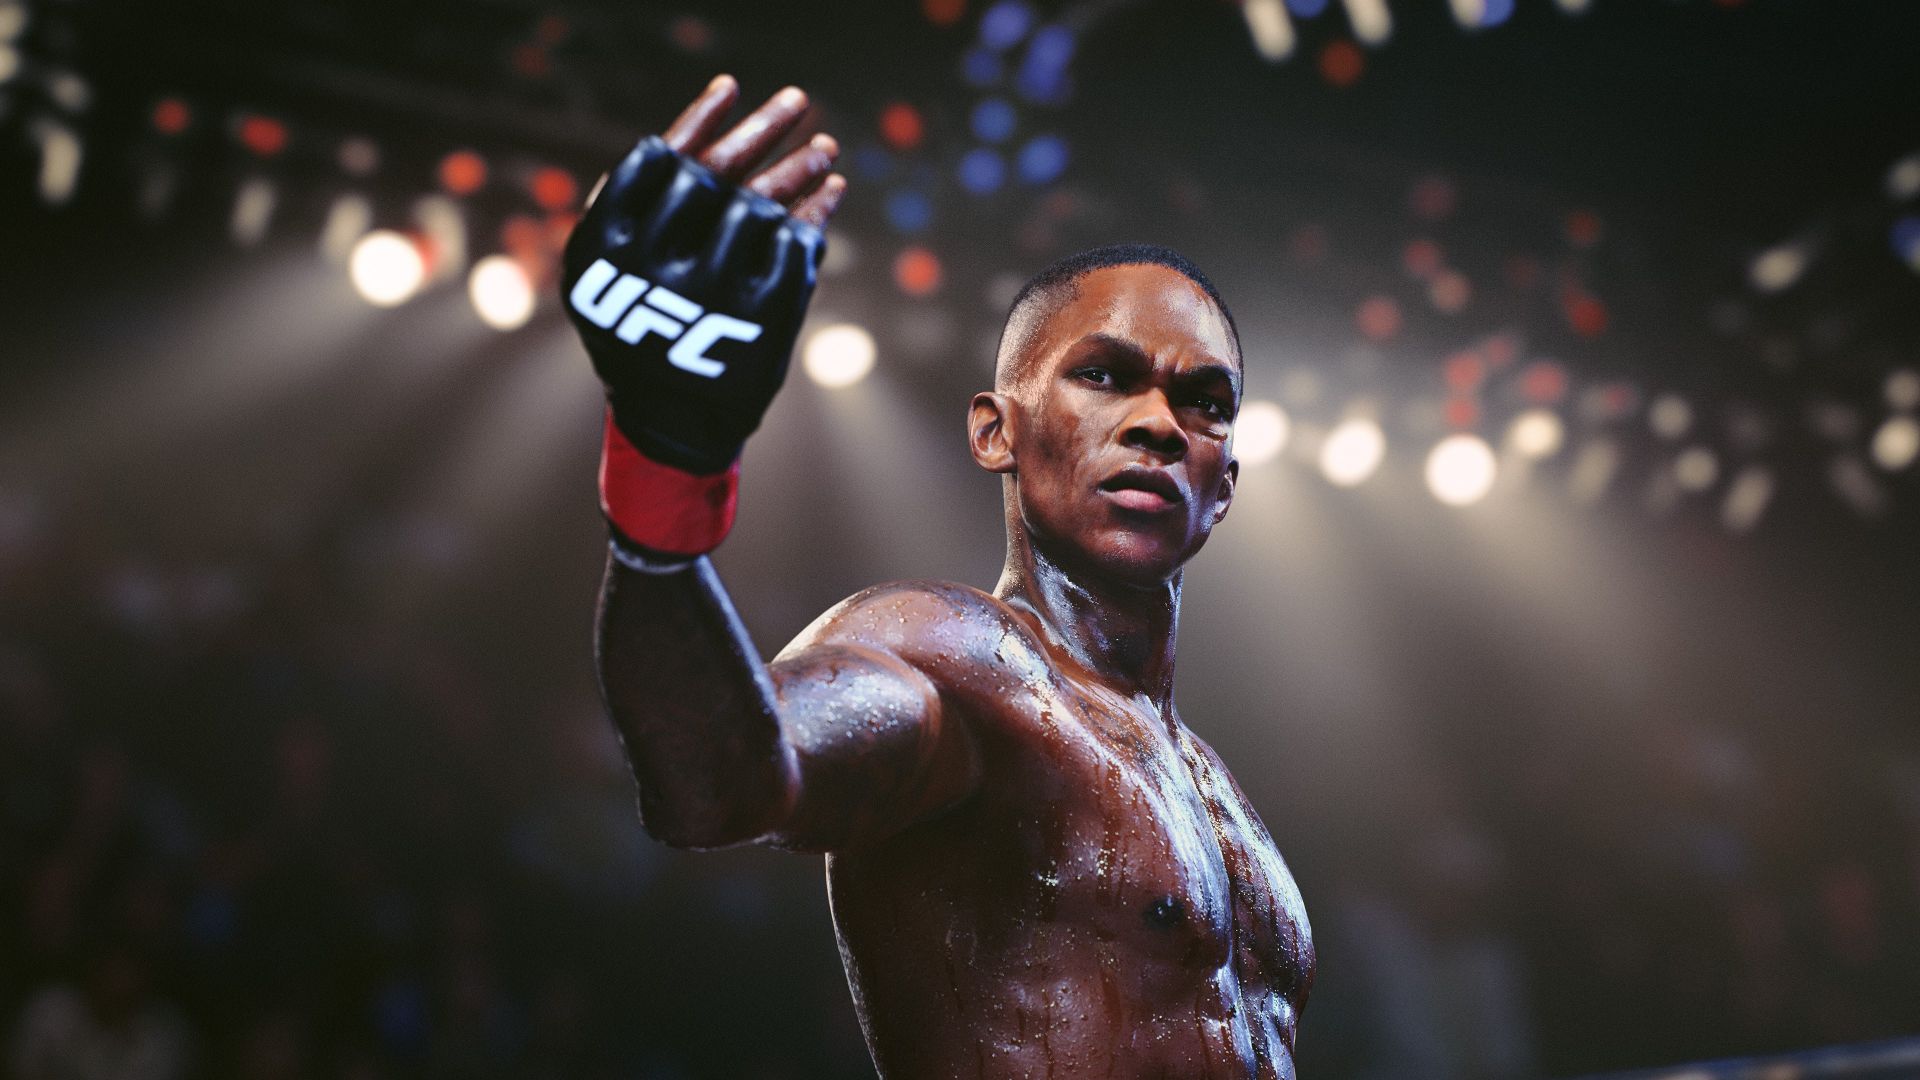 EA Sports UFC 5 Video Outlines Real Impact System, Seamless Submissions and More